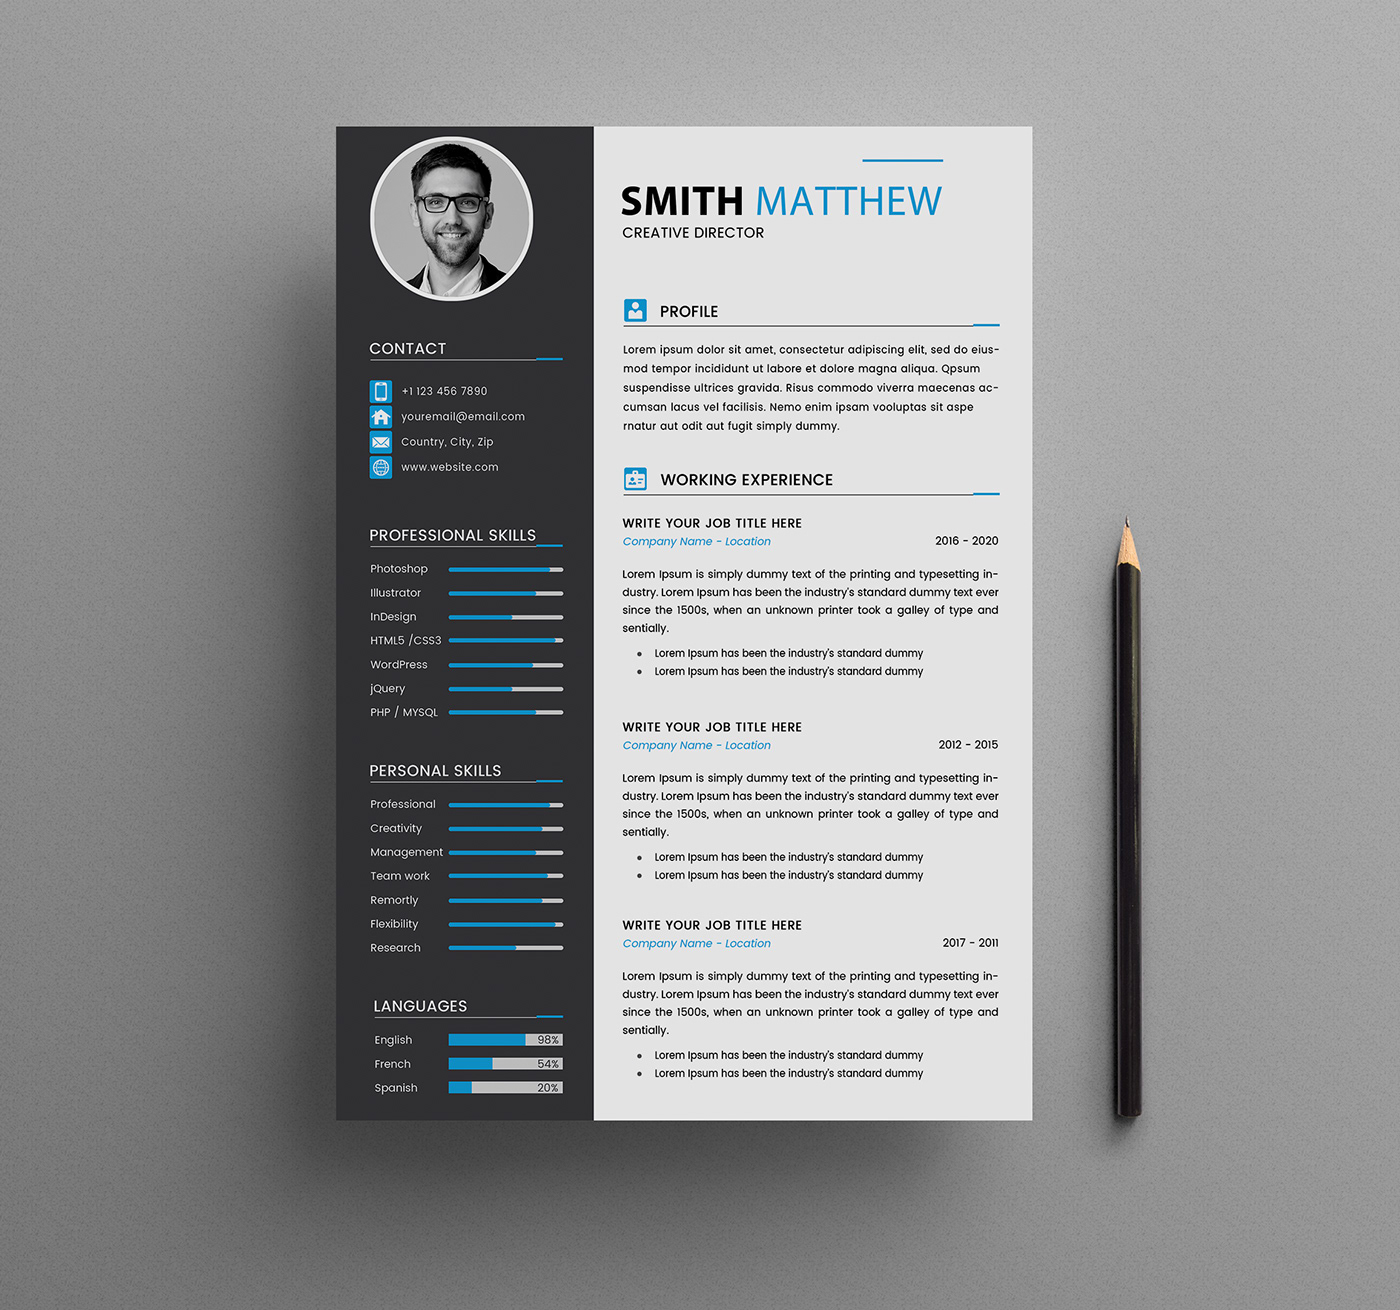 Free template download for resume play store app android free download